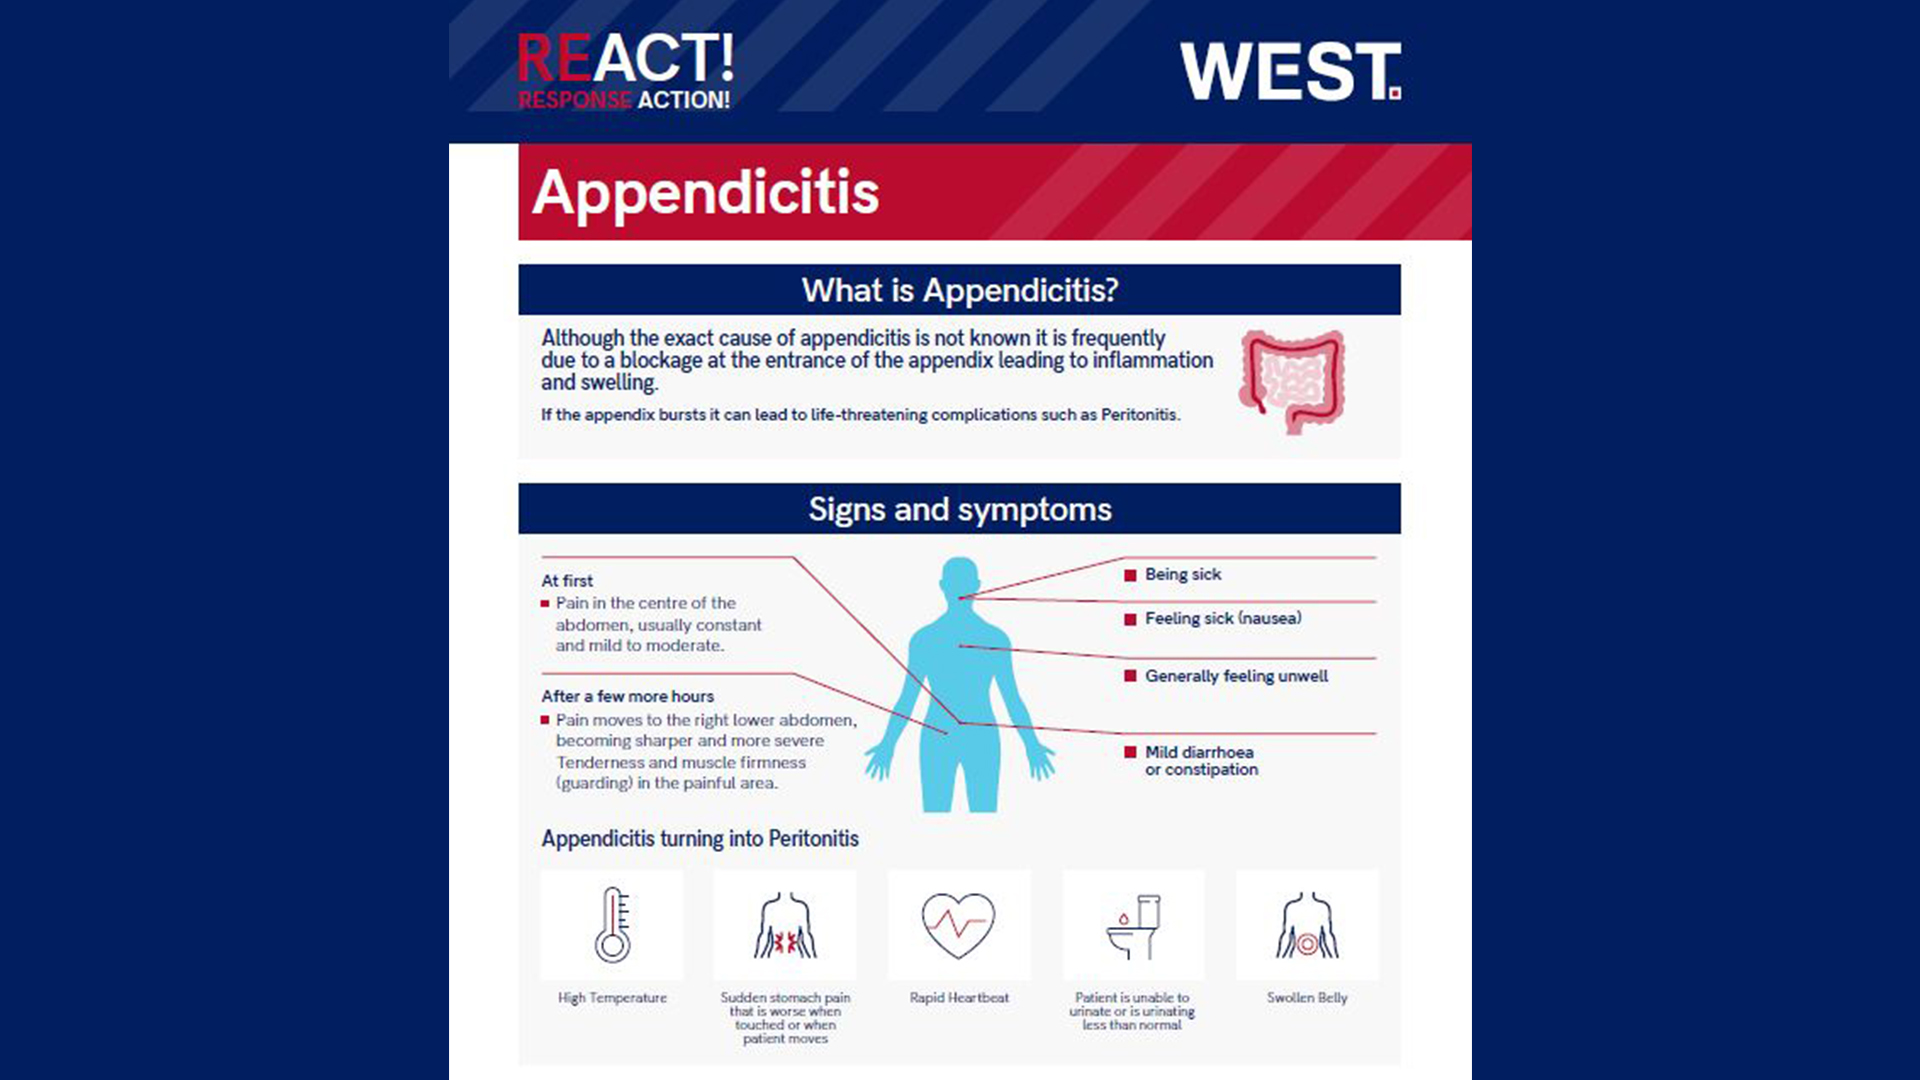 New REACT! Loss Prevention Poster Published on Appendicitis